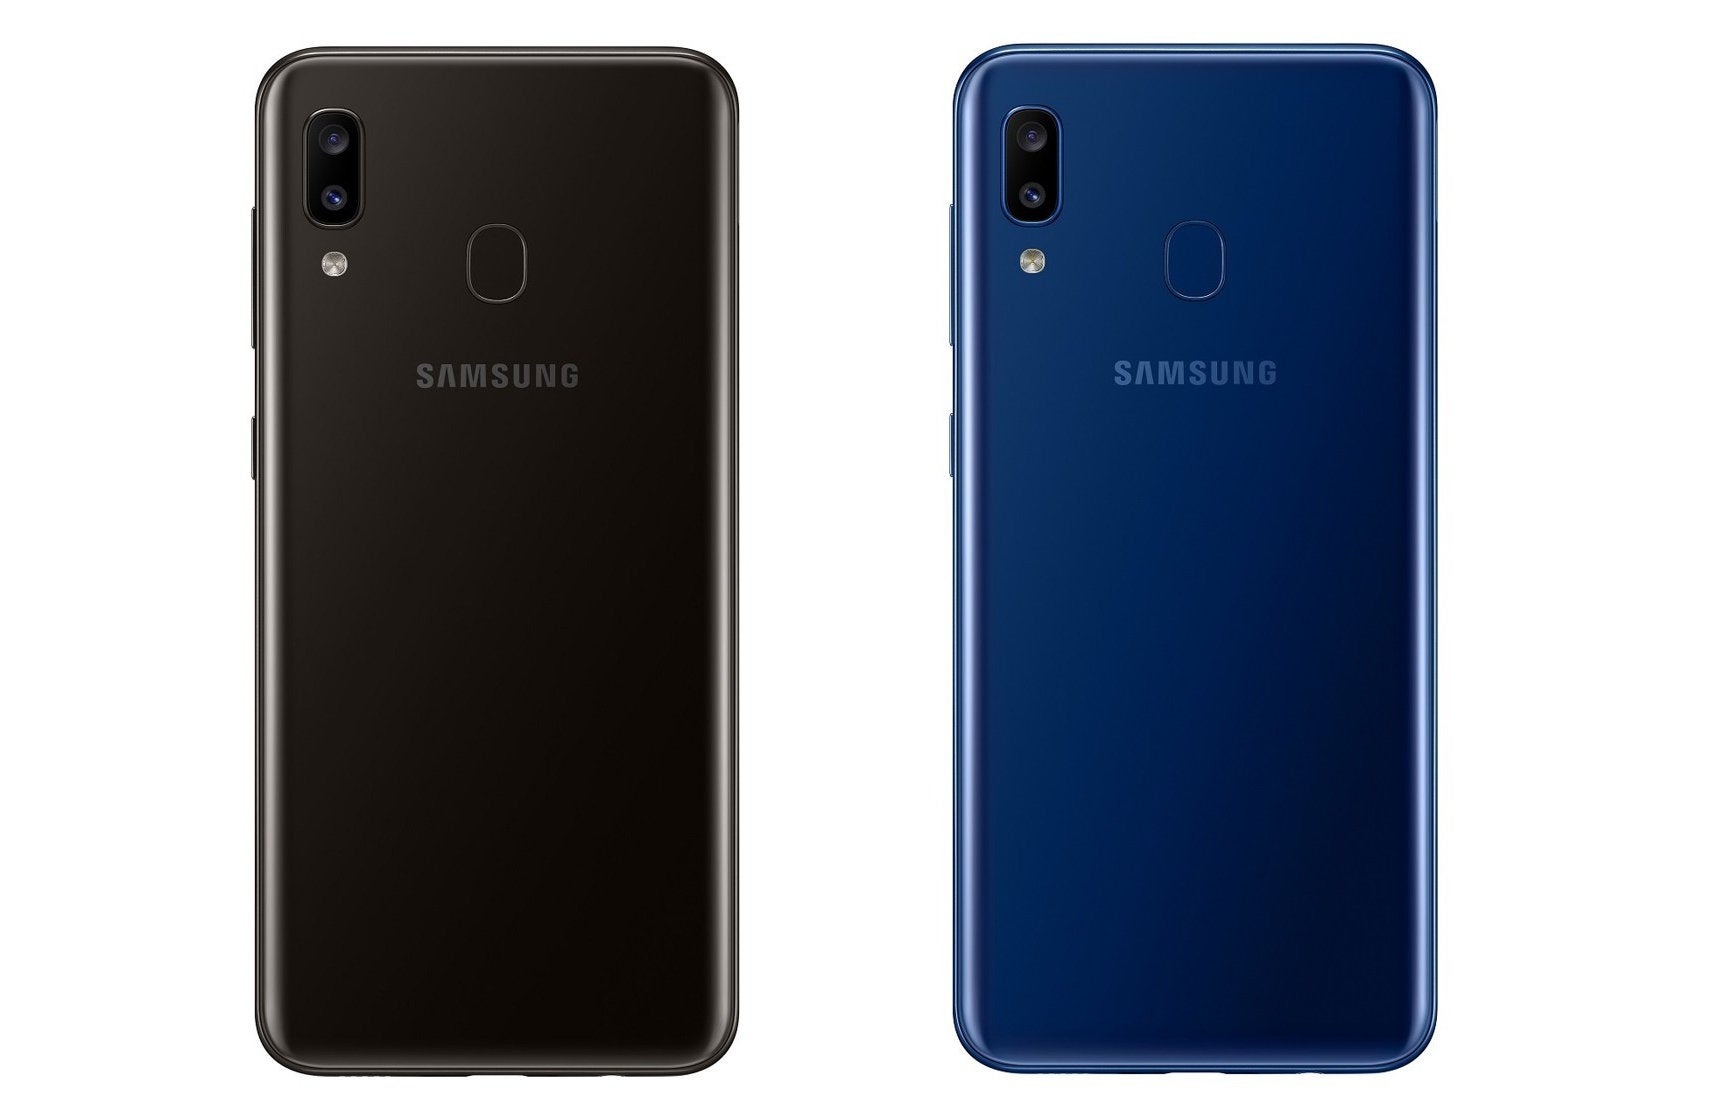 Samsung Galaxy A20 goes official with solid features, budget price tag